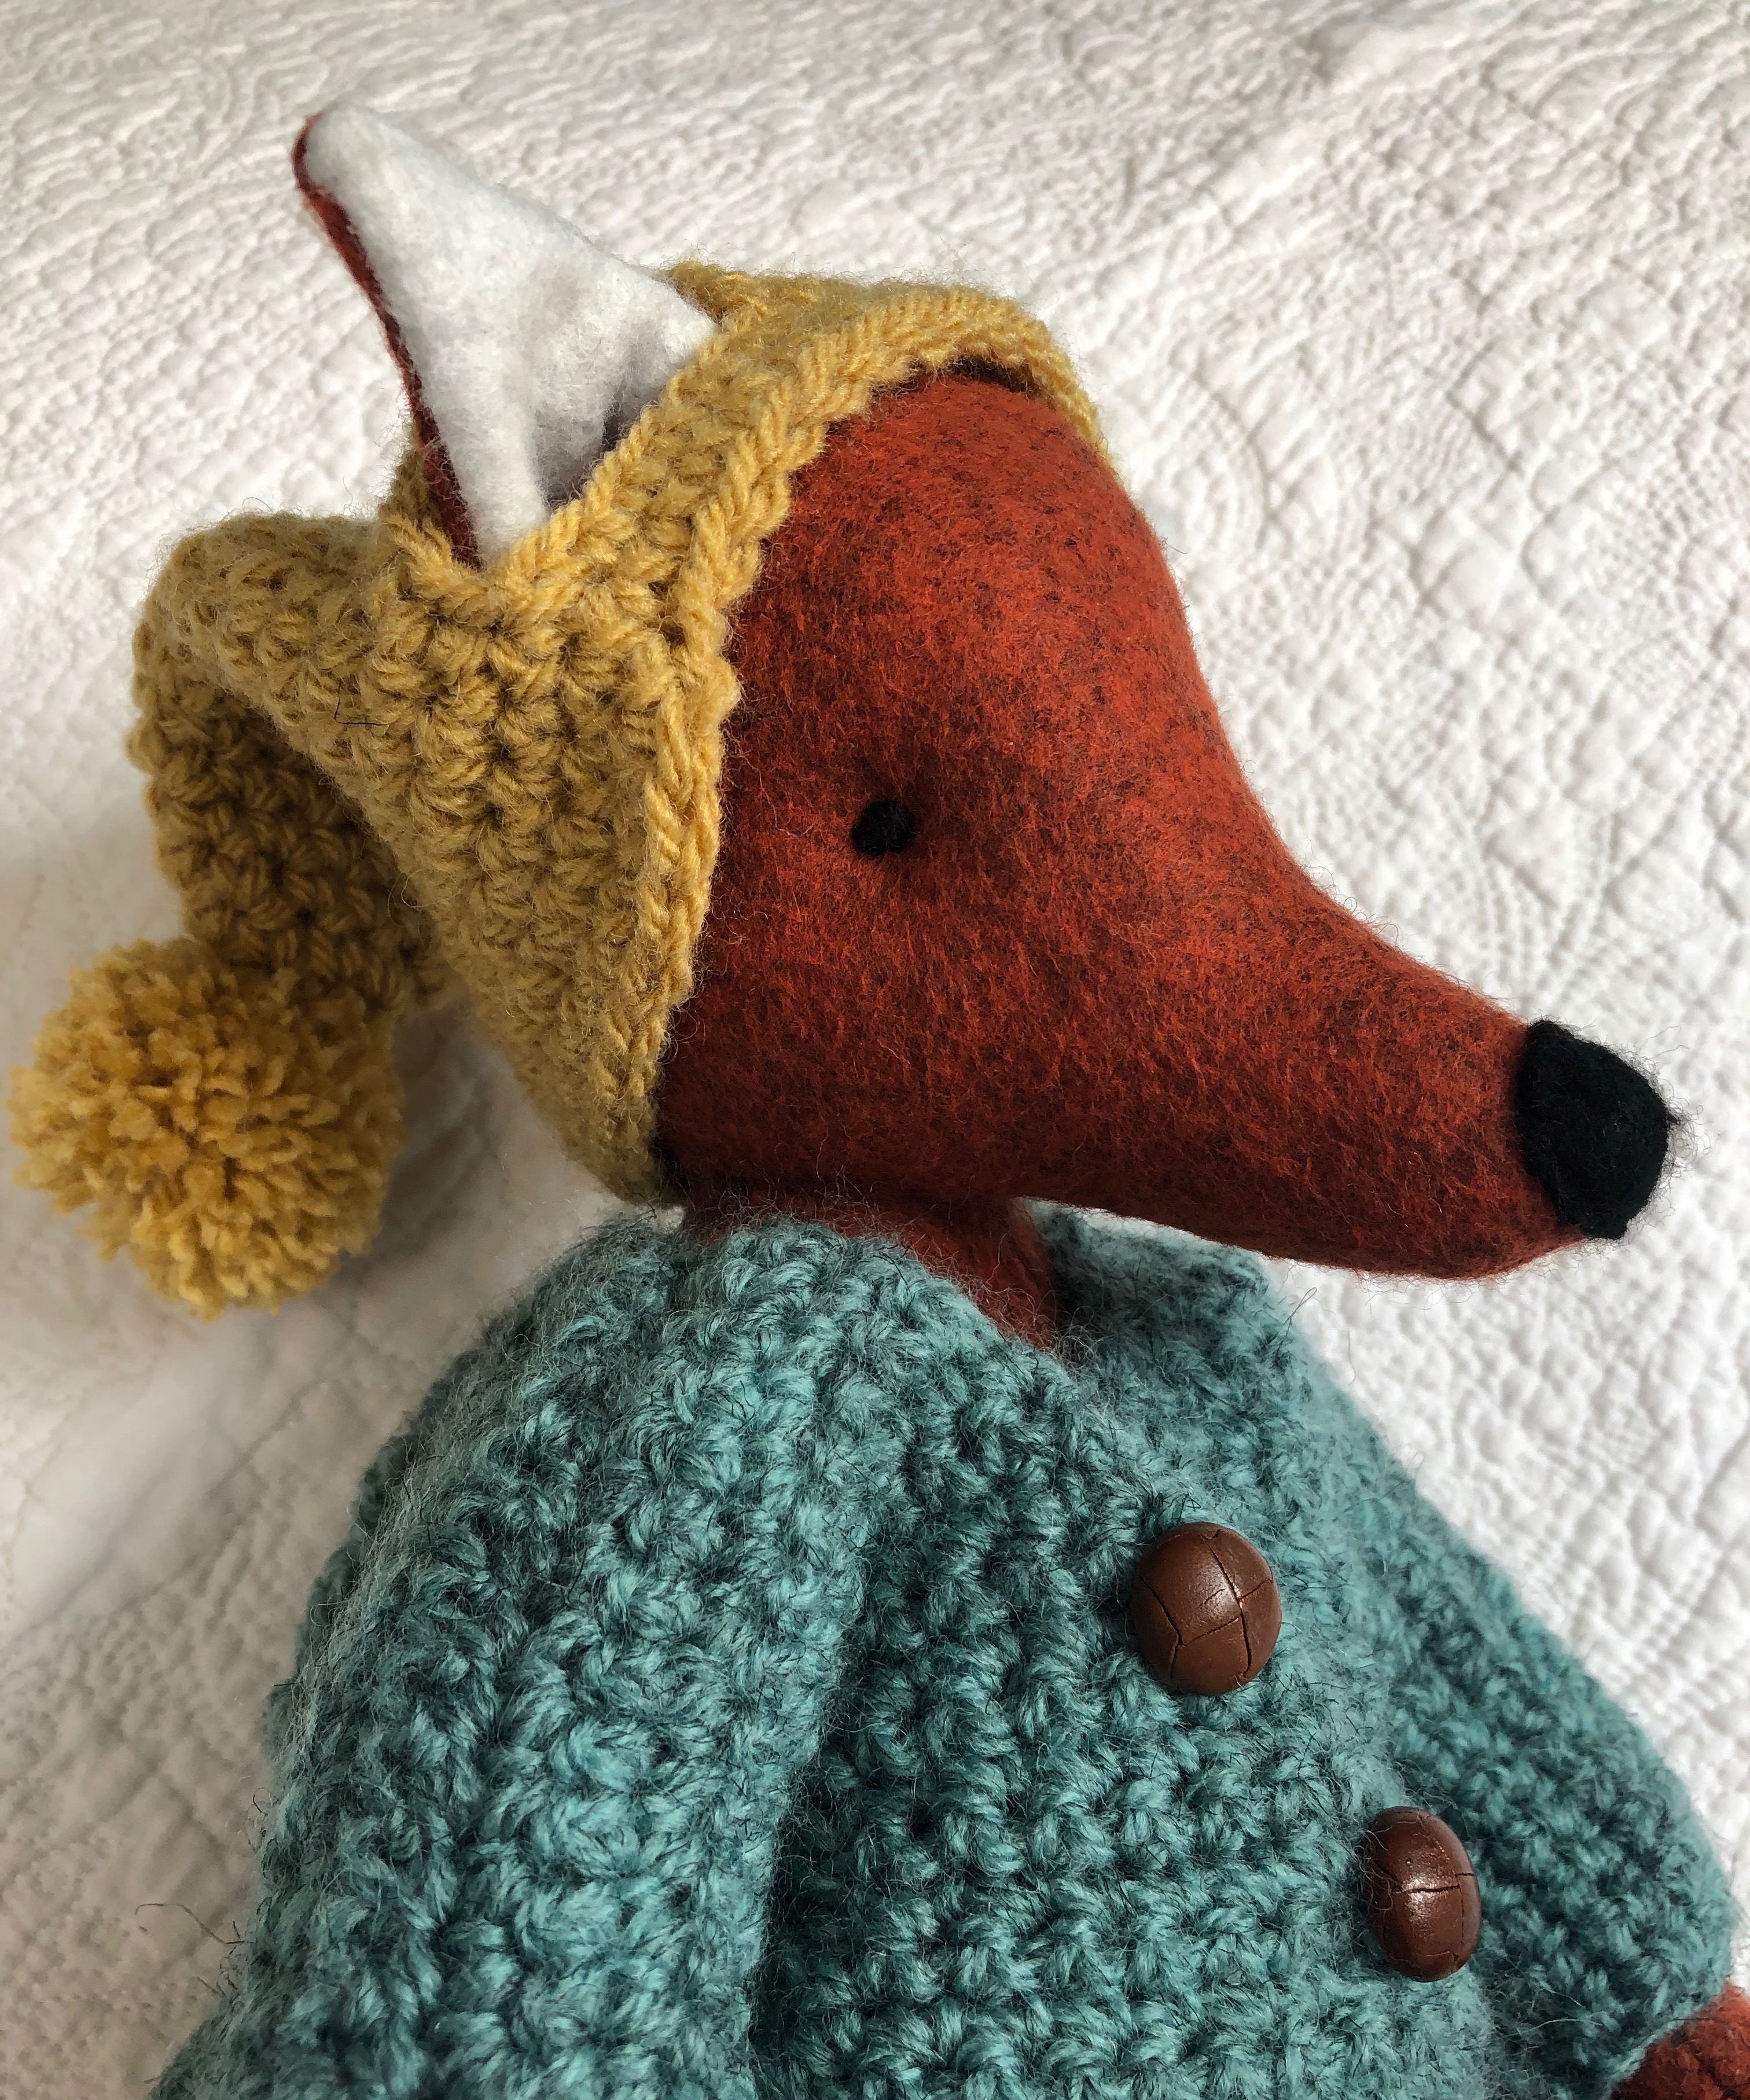 A handmade rusty brown felt fox with a green hand crocheted jacket, mustard yellow bobble hated little black felt boots. Fox pattern by Simone Gooding, crocheted clothes designed and made by me.